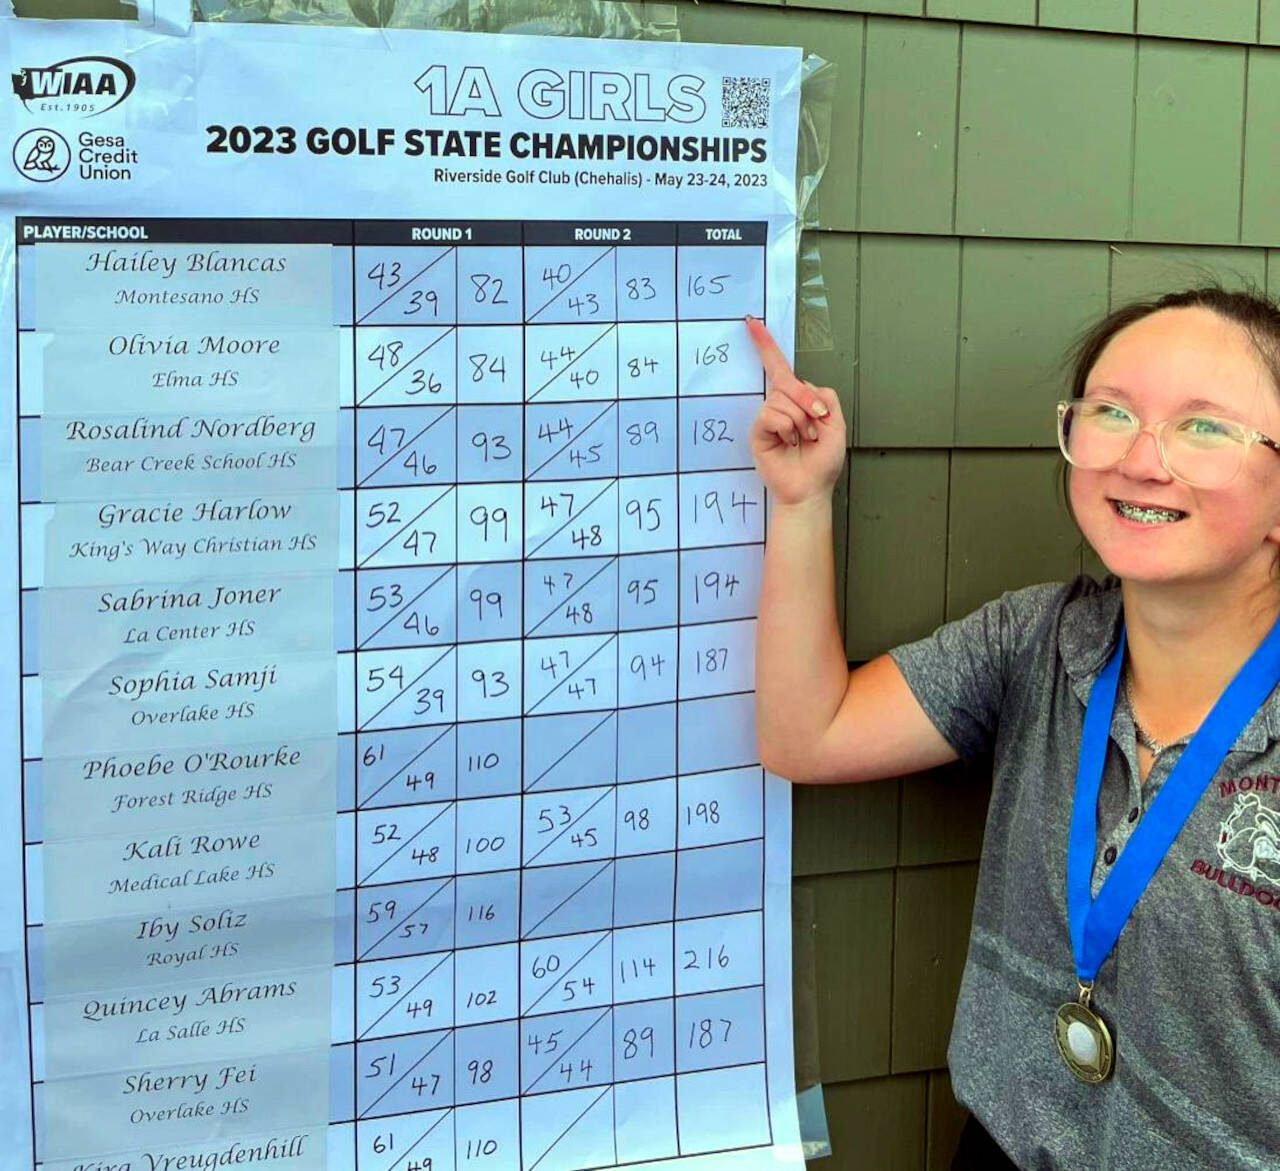 SUBMITTED PHOTO Montesano junior Hailey Blancas points to her score on the leaderboard after winning the 1A State Championship on Wednesday at the Riverside Golf Course in Chehalis.